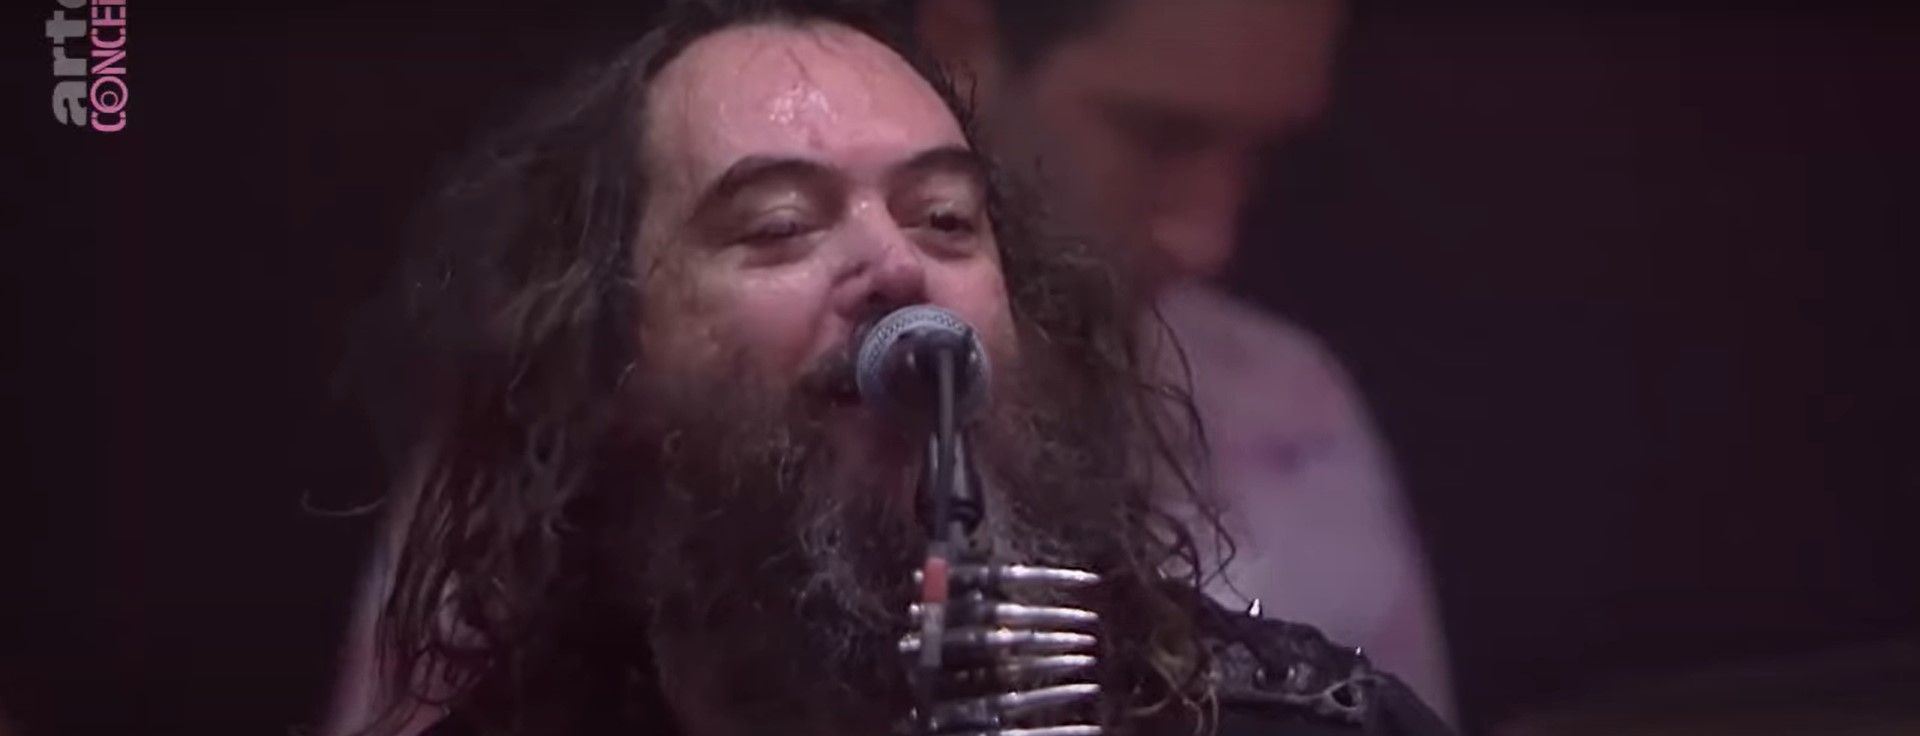 Soulfly - Live At Full Force Festival 2018 (Full)